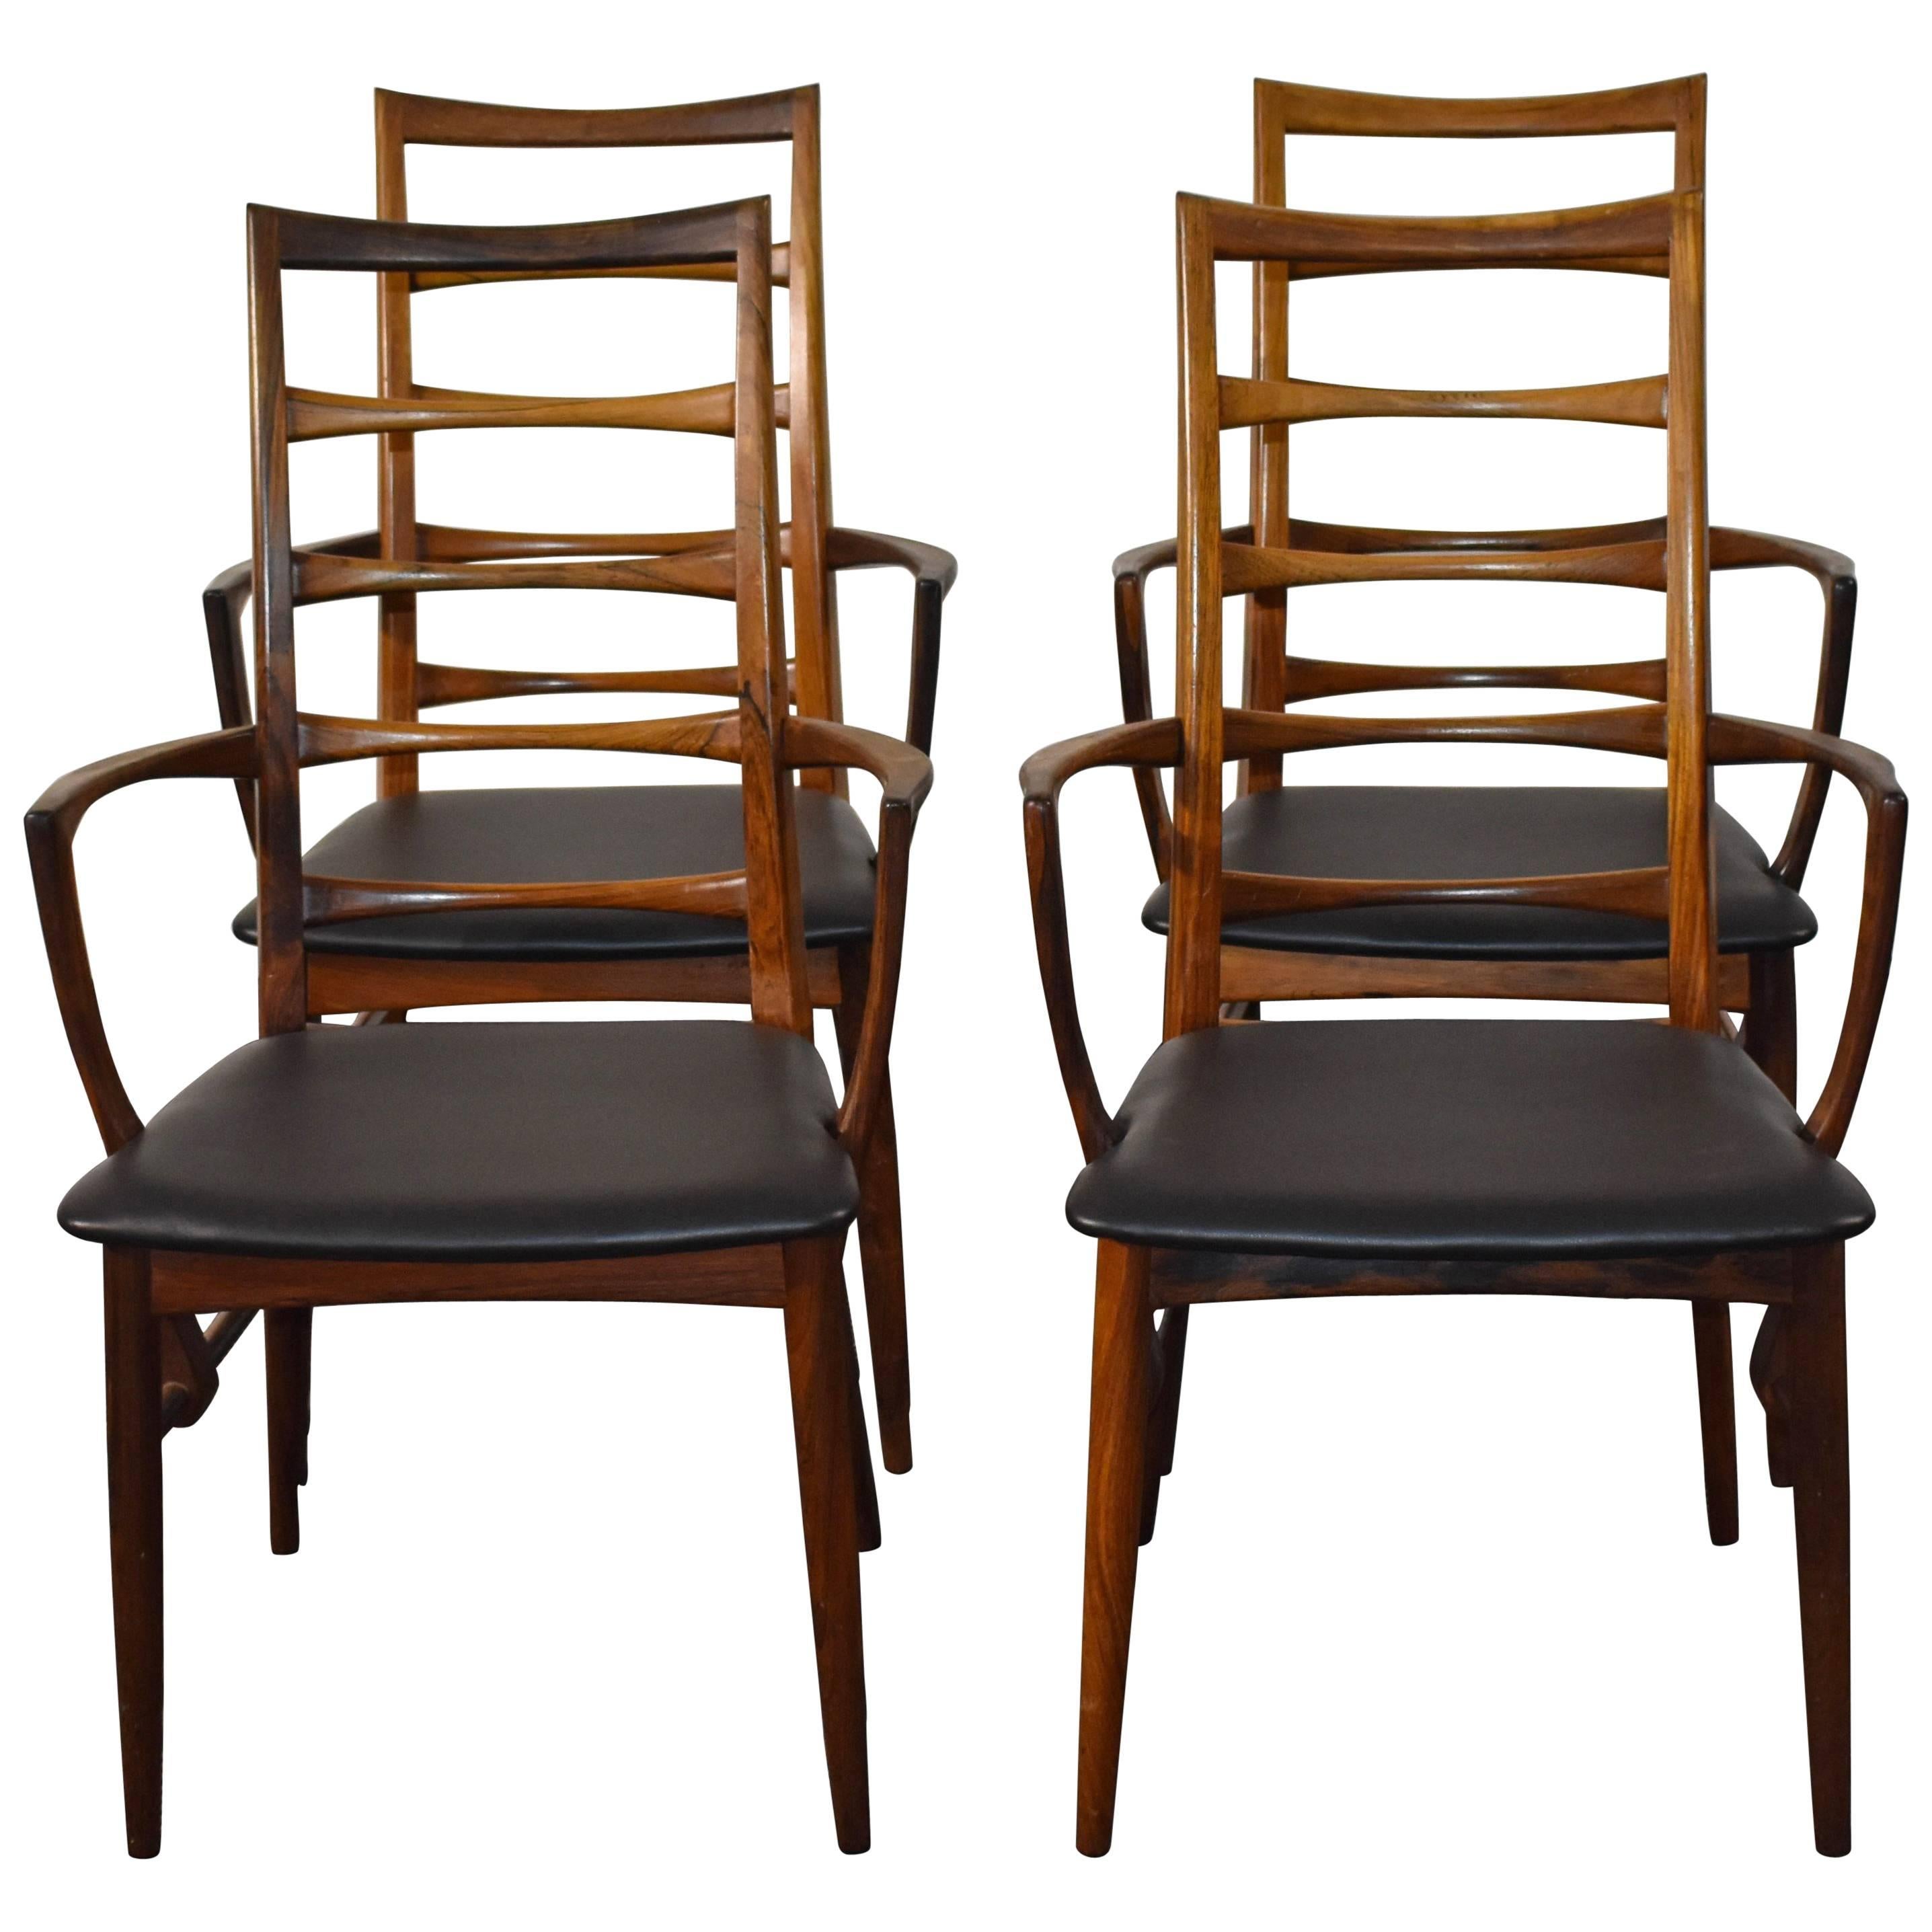 Niels Kofoed Lis Armchairs in Rosewood, 1950s, Mid-Century Modern For Sale